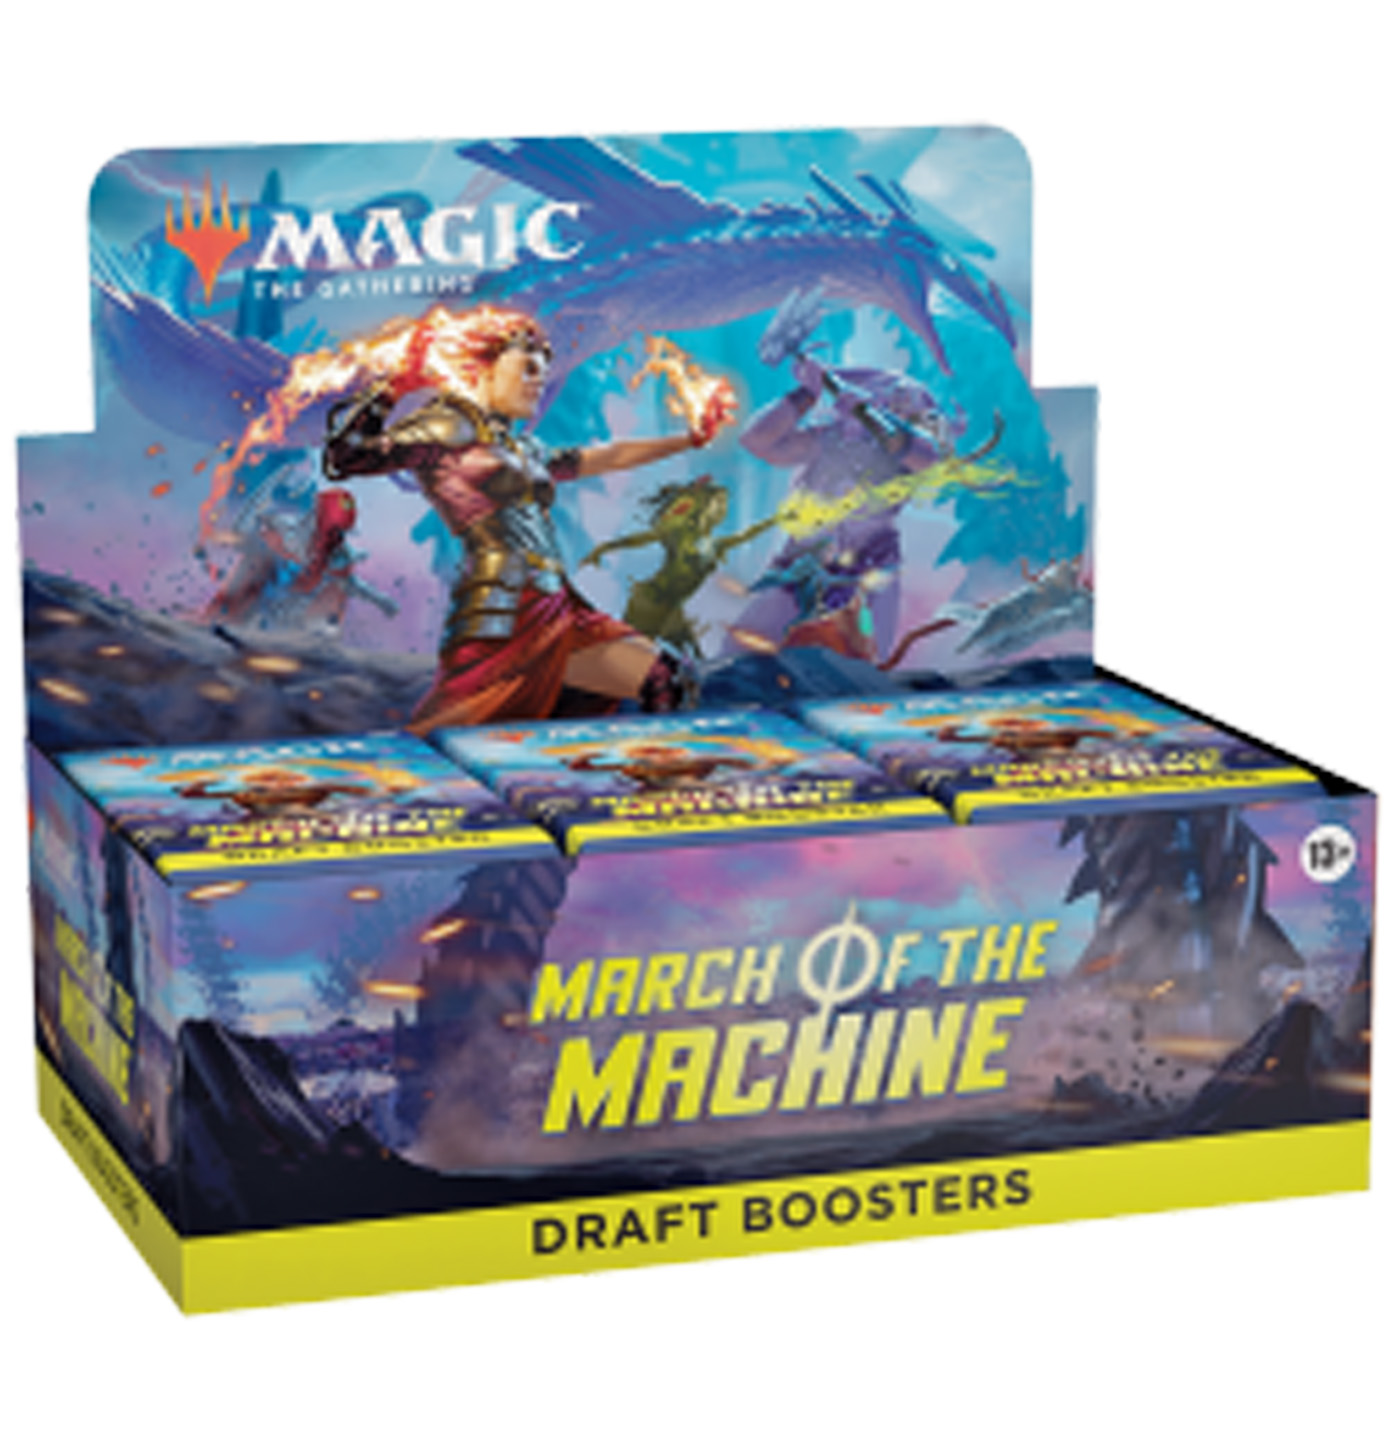 March of the Machine Draft Booster Box - Magic the Gathering - EN